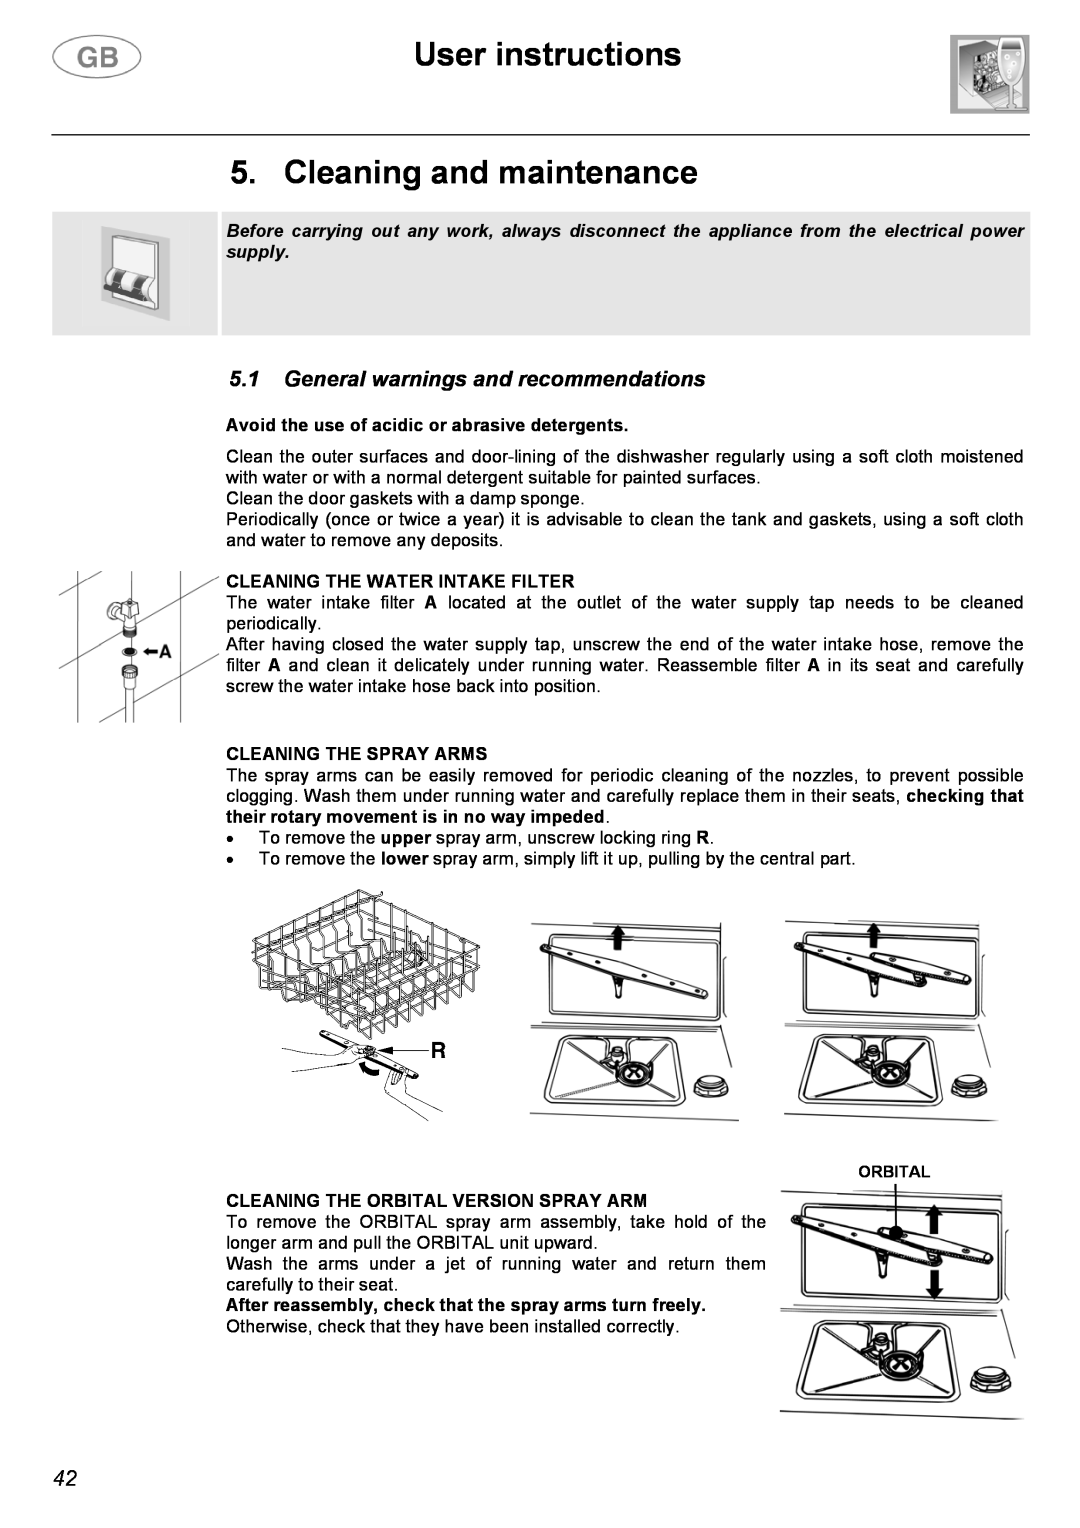 Smeg EL05 User instructions 5. Cleaning and maintenance, 5.1General warnings and recommendations, Cleaning The Spray Arms 